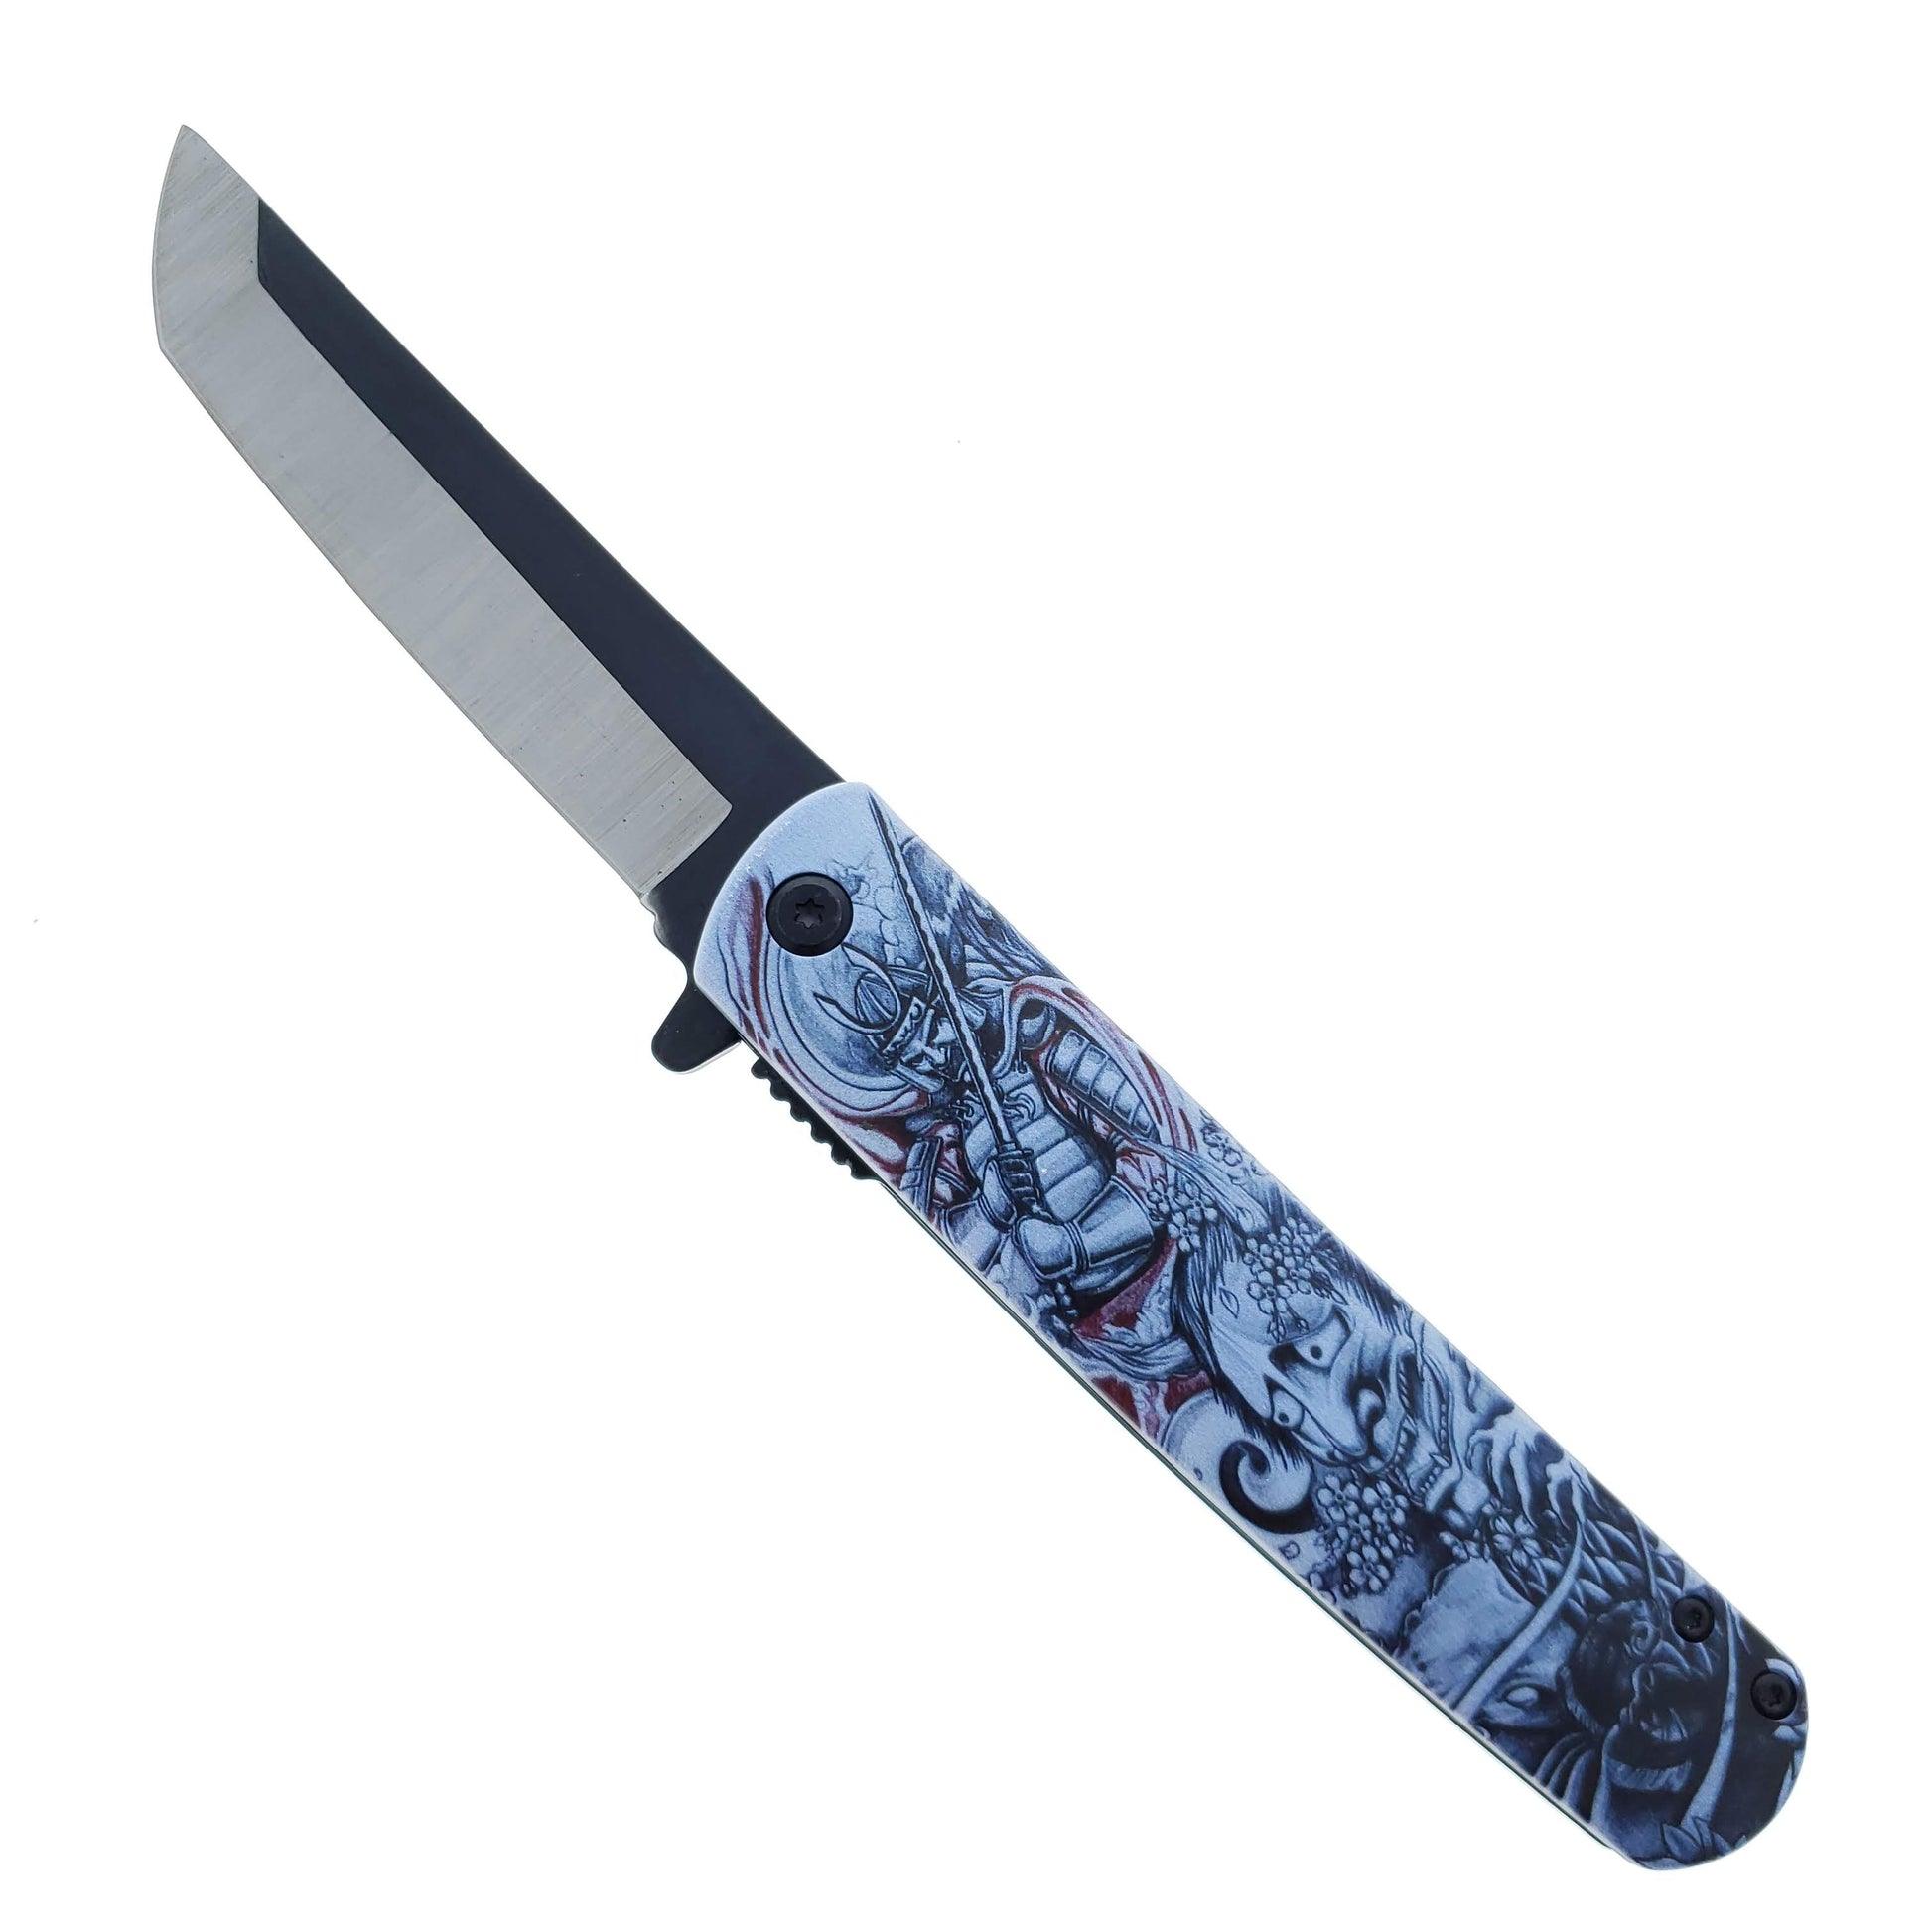 Buy Blue Tanto Pocket Knife Wholesale Price Online: Pacific Solution.